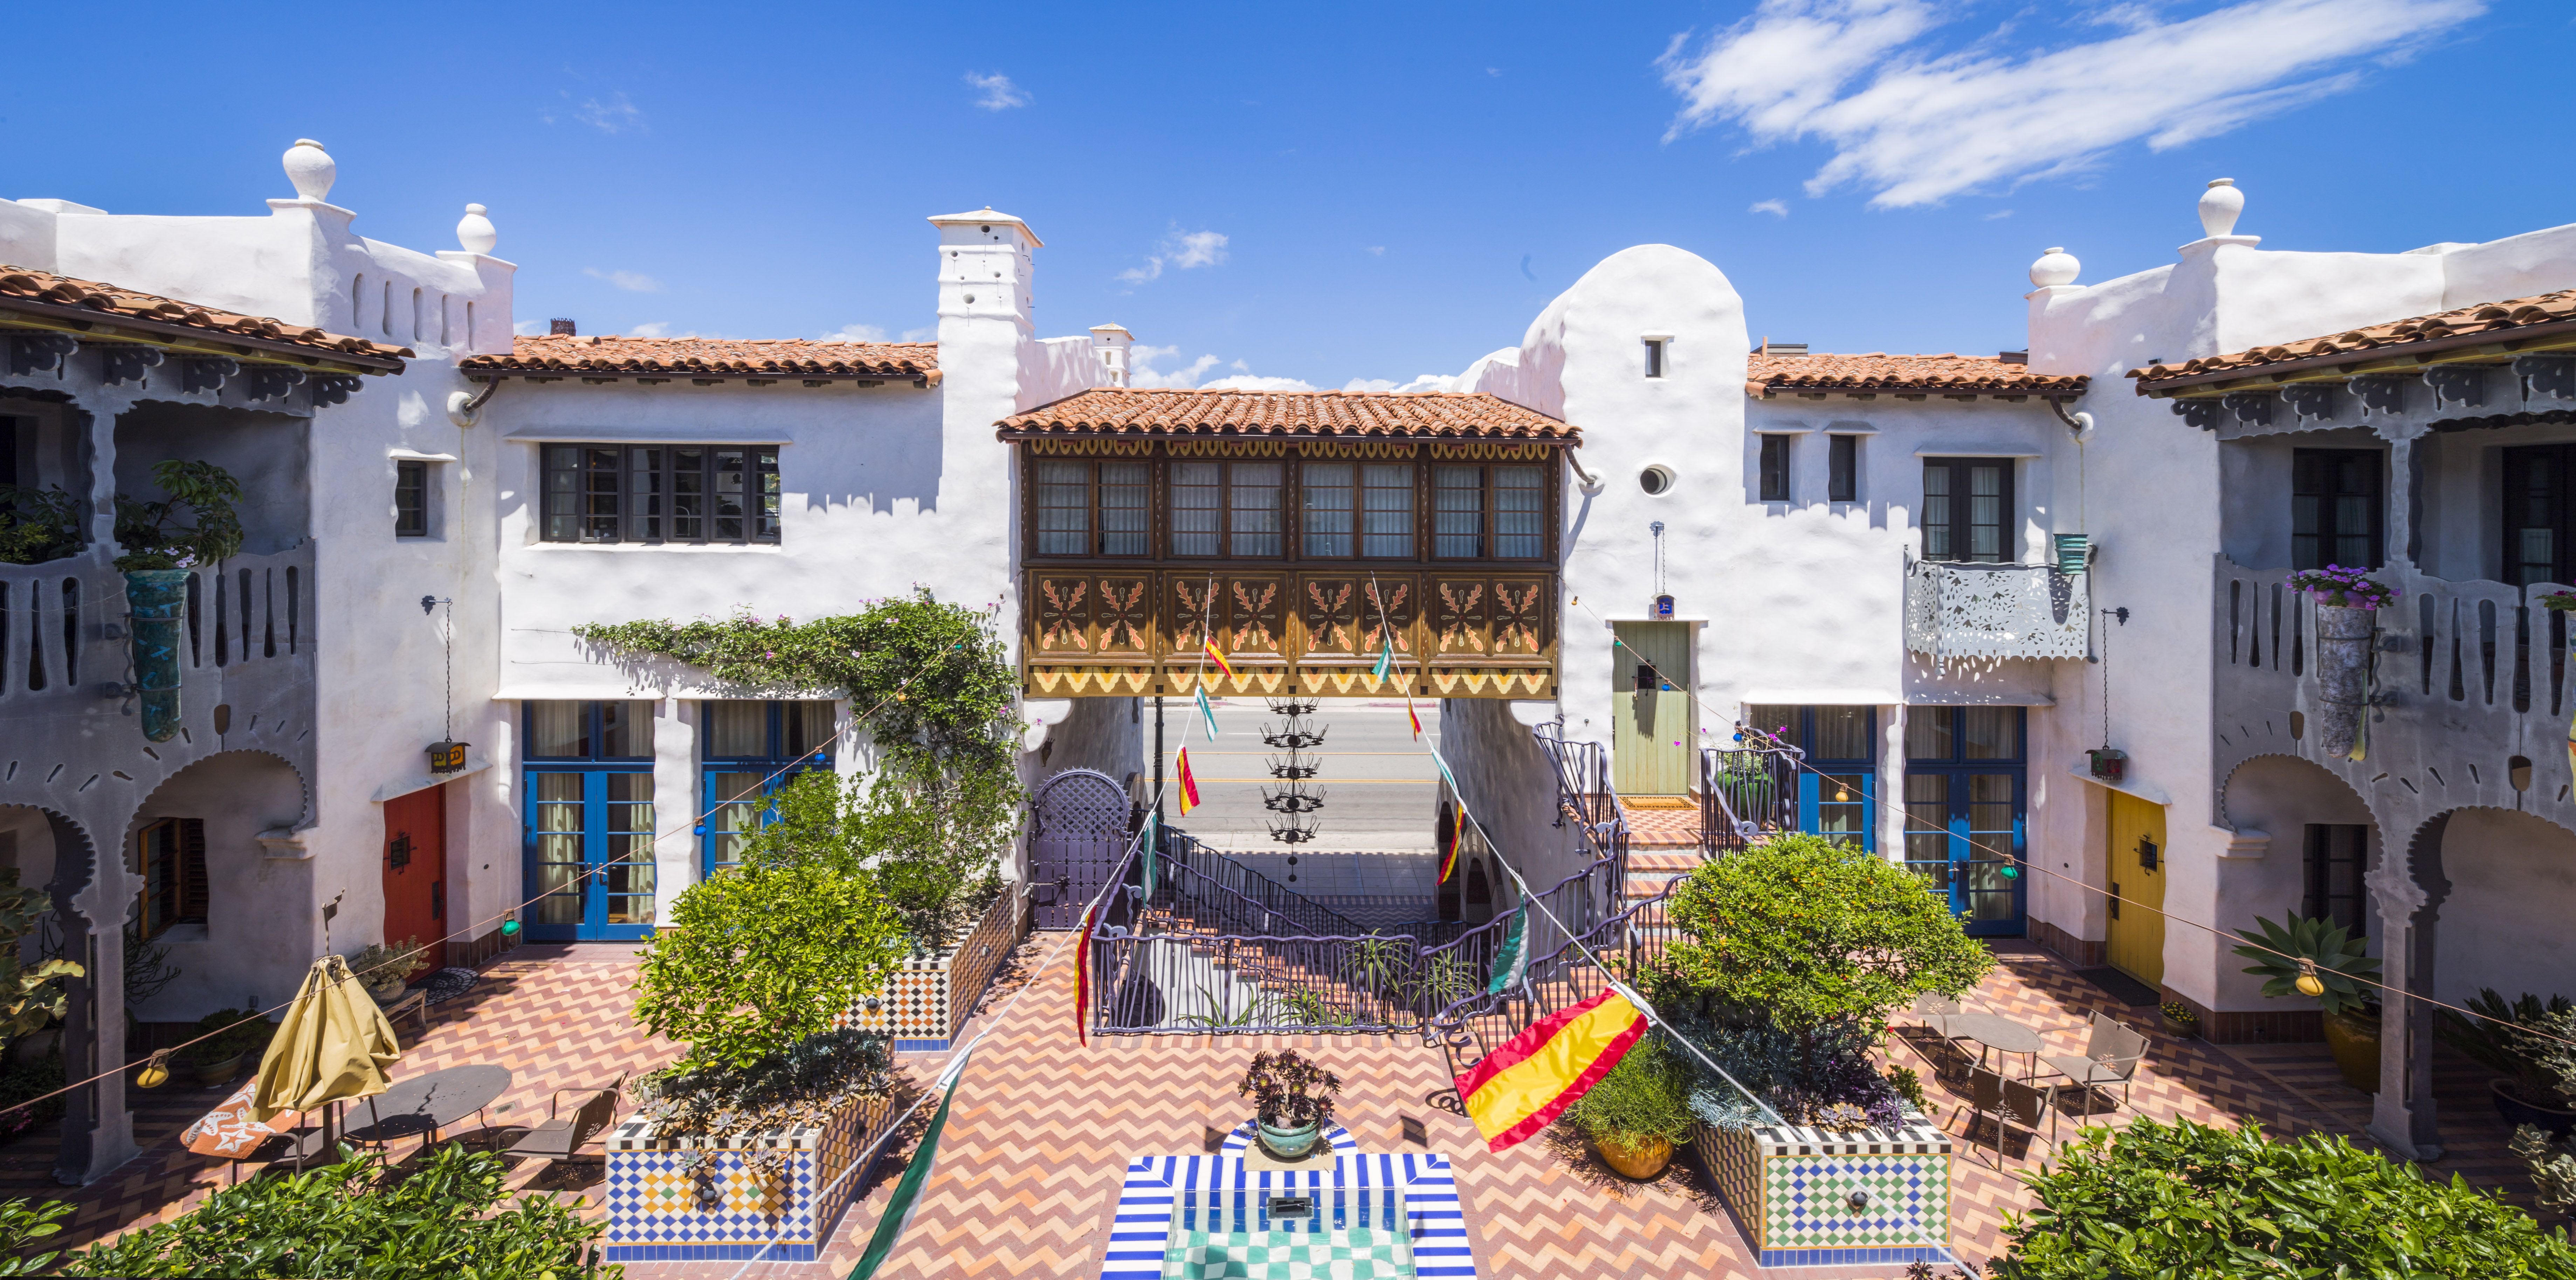 The courtyard of a Jeff Shelton-designed two-story building that incorporates traditional Mediterranean design elements and Shelton's bold, whimsical, contemporary twists.